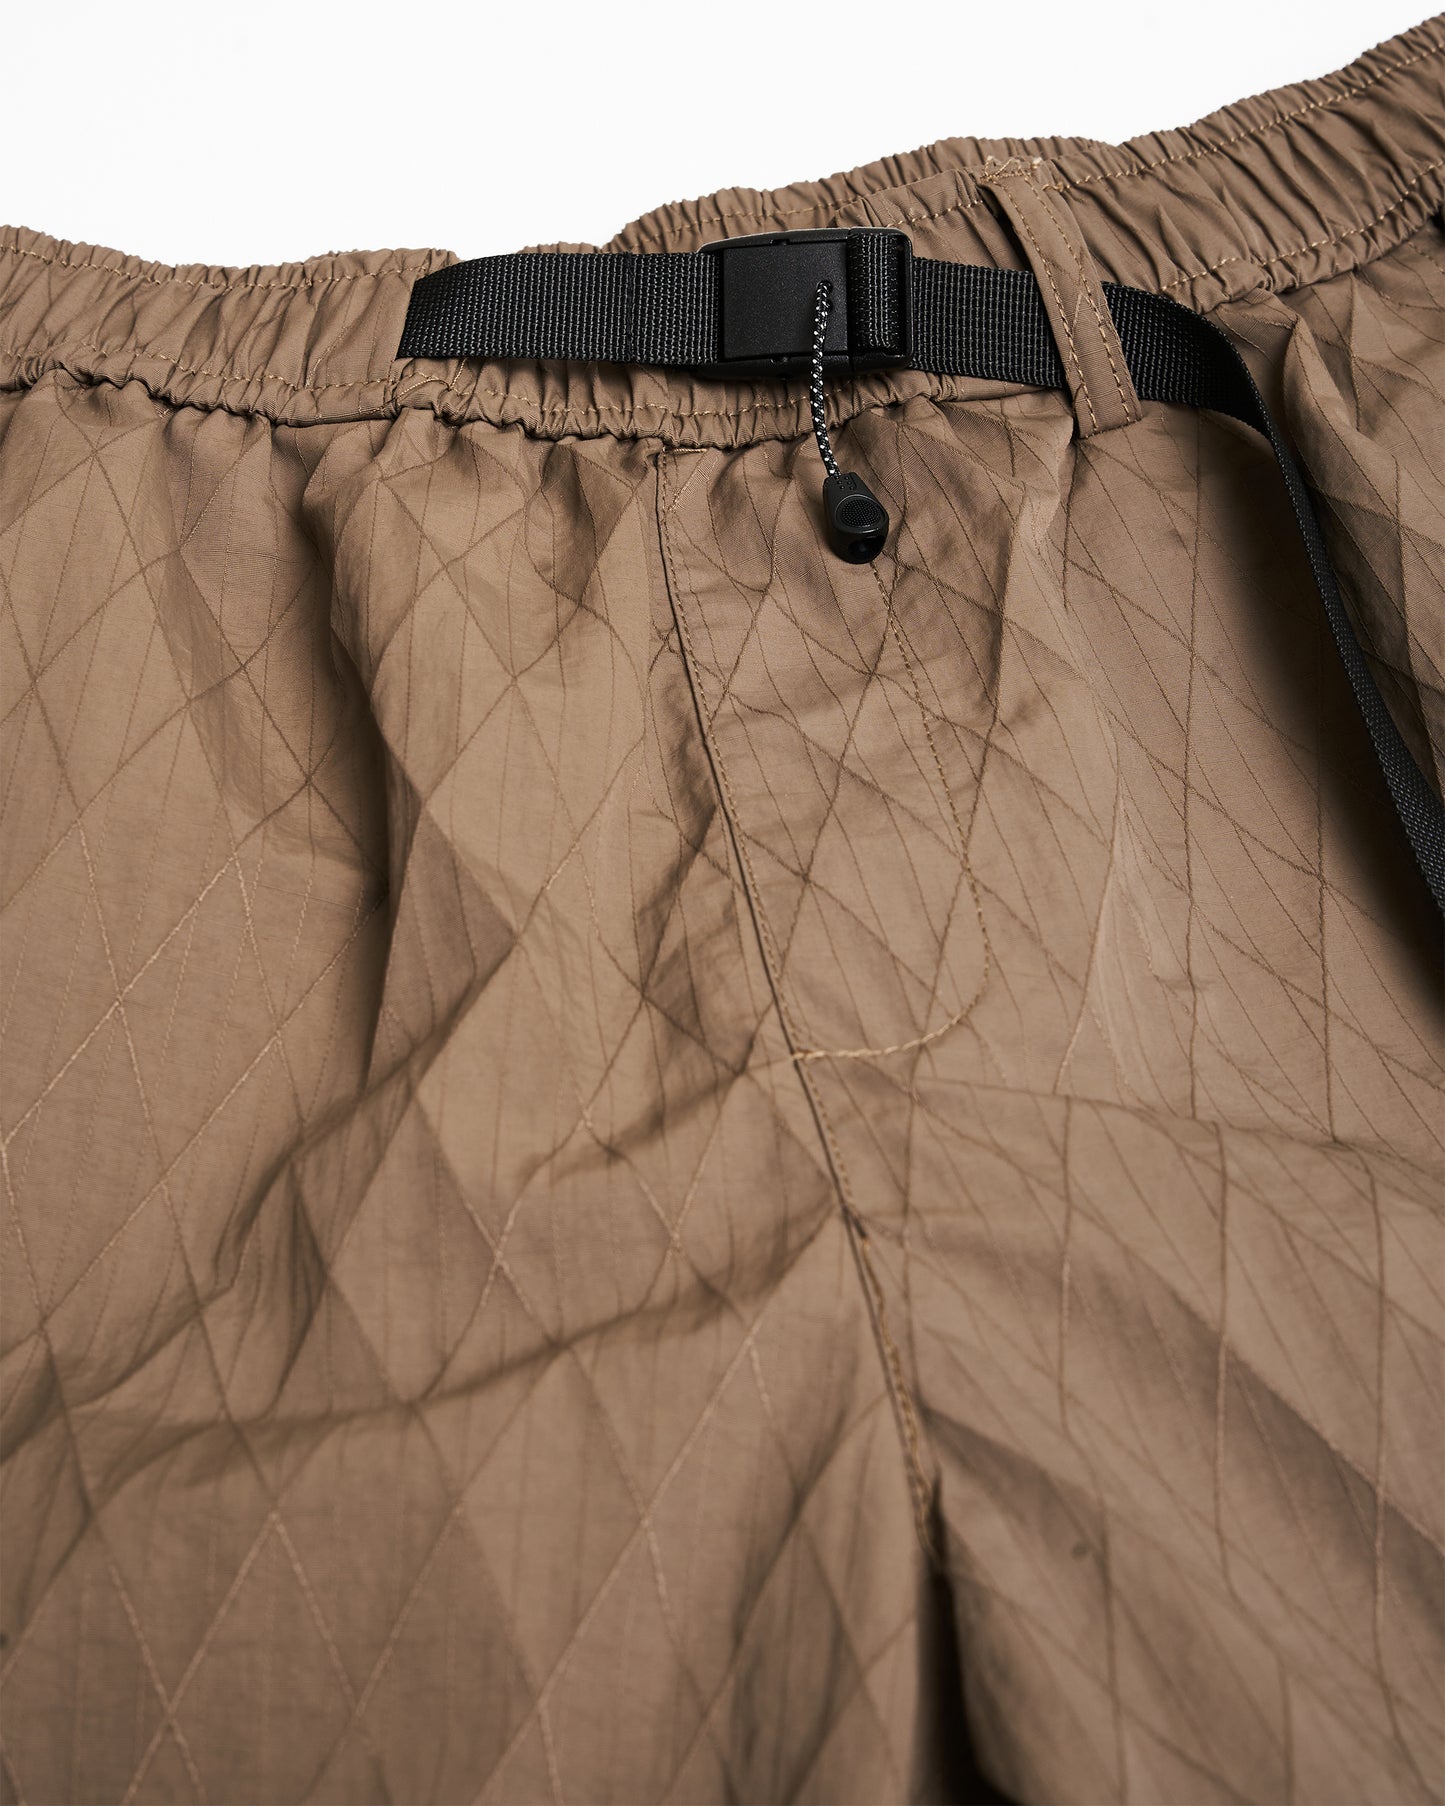 ESSENTIAL SHORTS (BROWN)